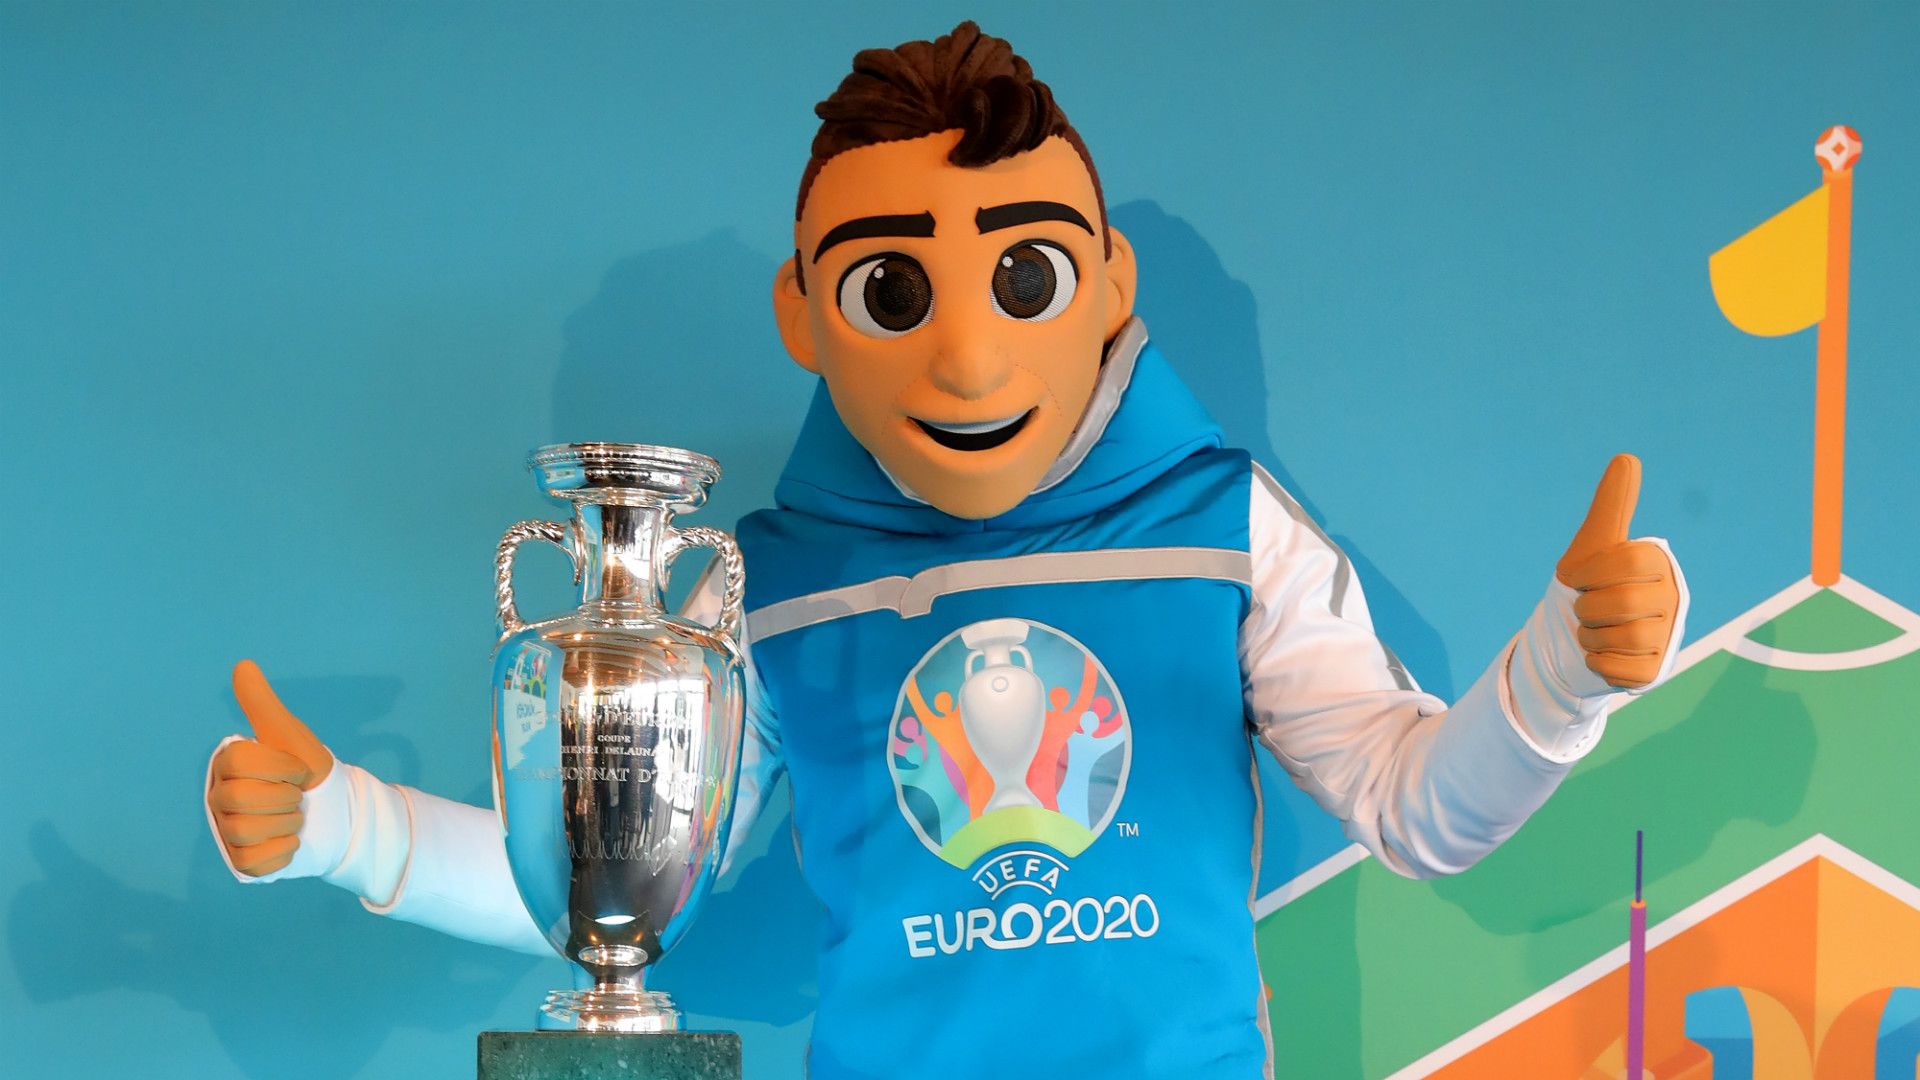 Euro 2020 mascot: What is it & who are the previous finals mascots?